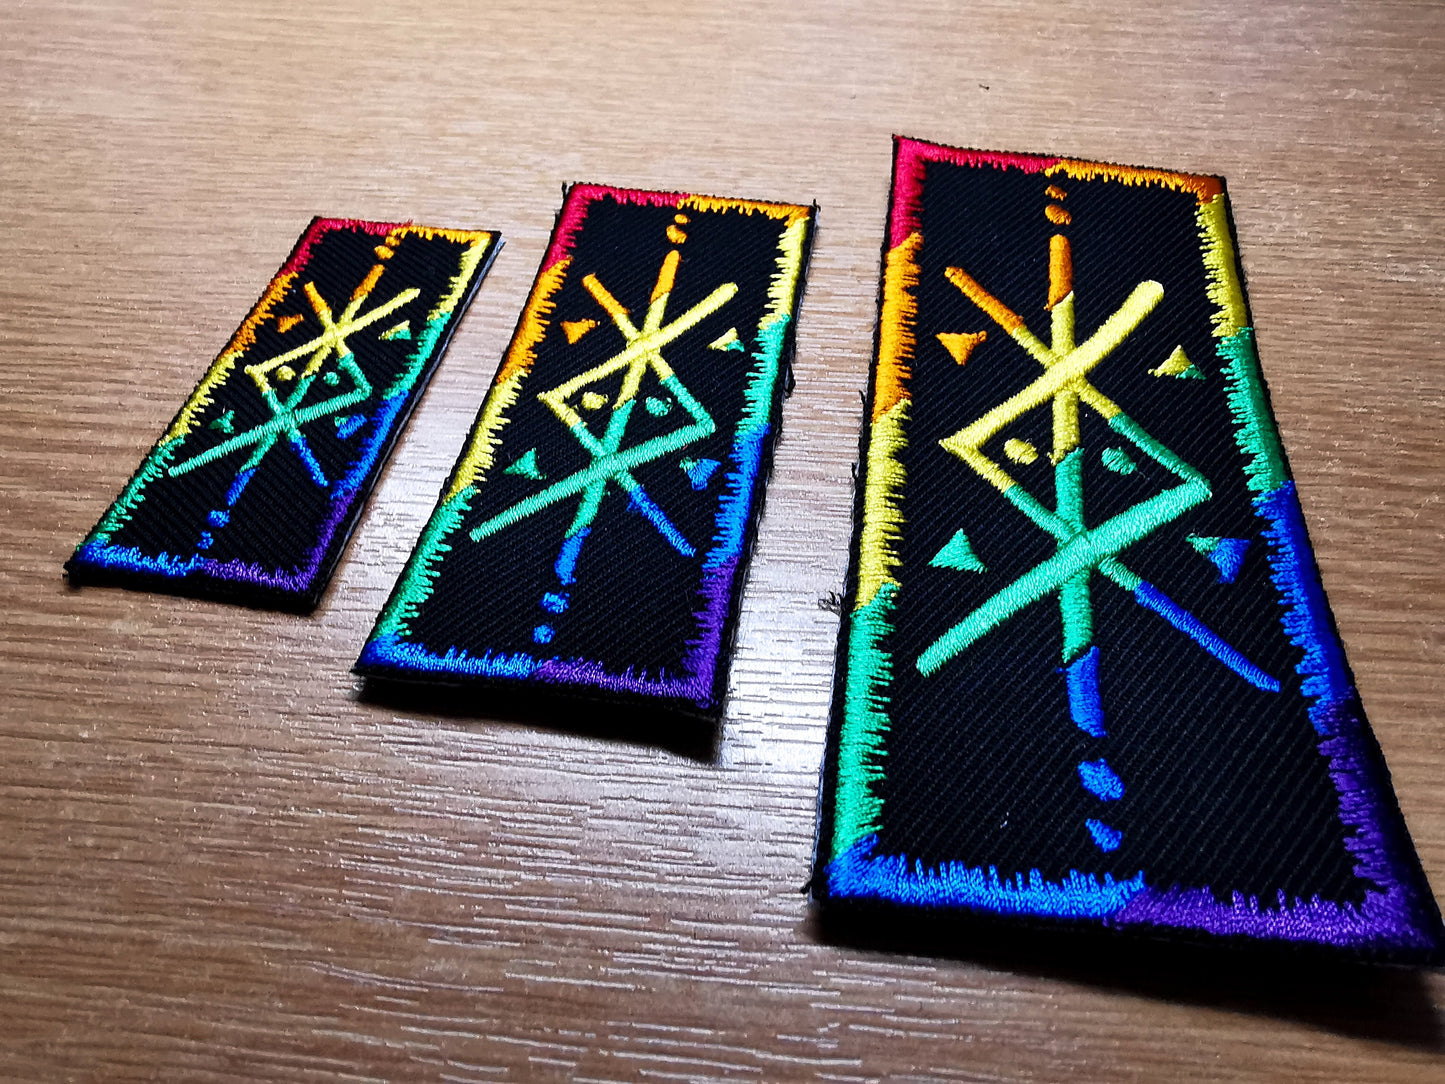 Rainbow Protection Bindrune Patch Iron On Embroidered Norse Heathenry Bind Runes Viking LGBTQ+ Inclusive Gender Pronoun